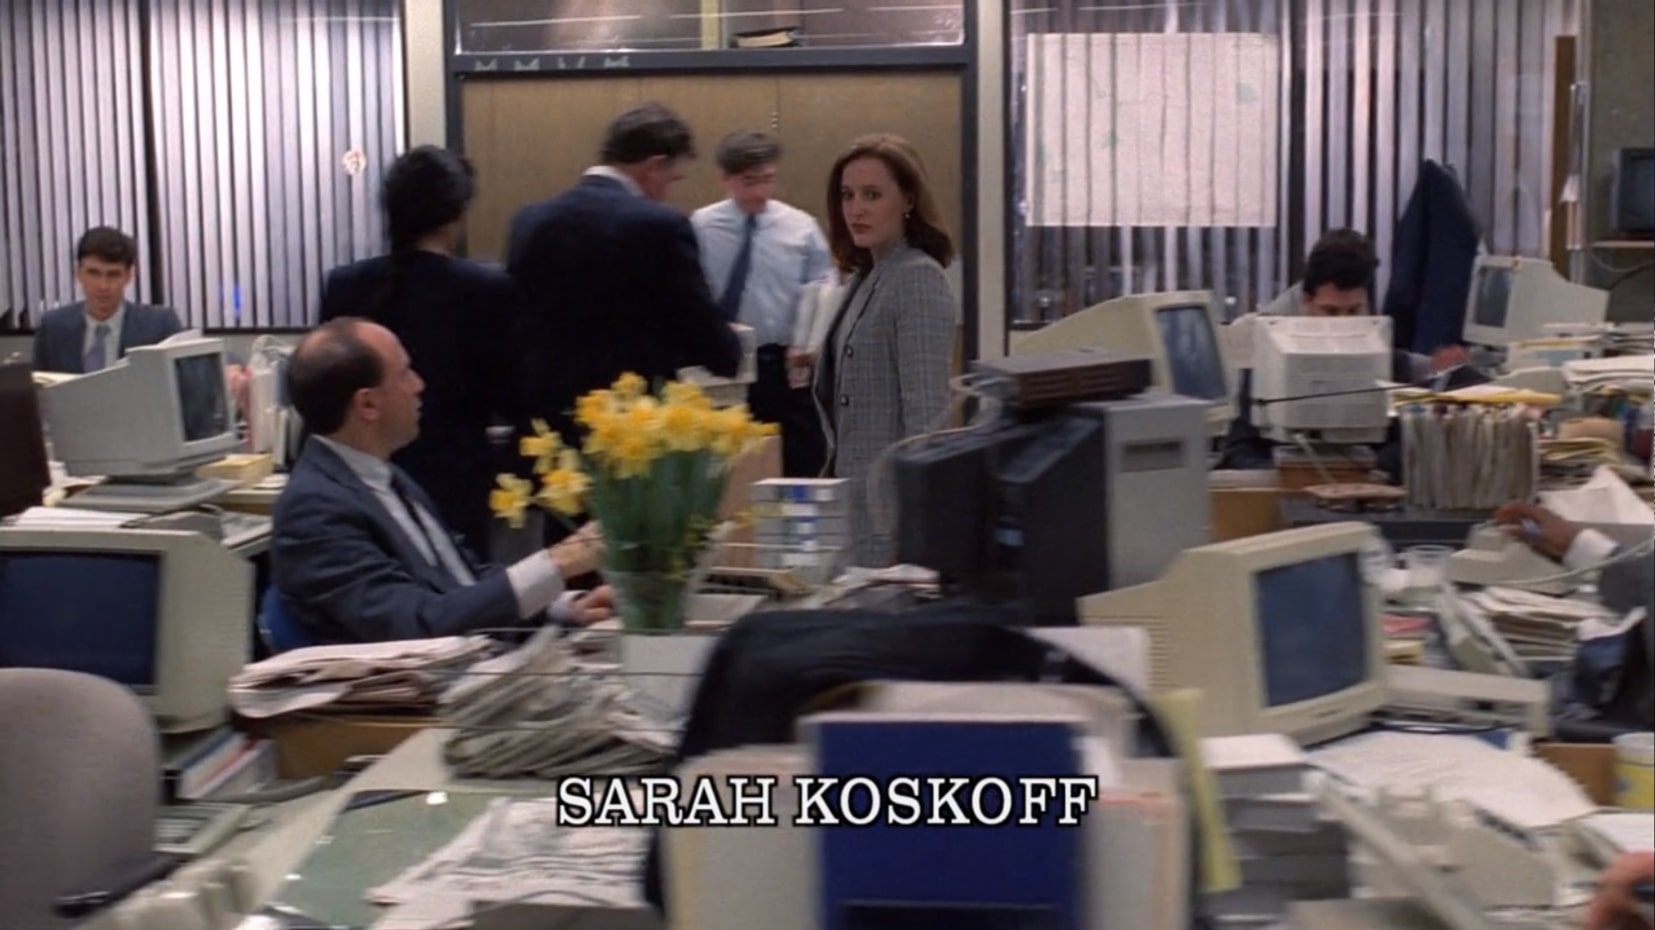 Scully walks briskly through a busy large office area, where numerous cluttered desks can be seen. Some FBI agents are in the background, their faces either blurry or turned from the camera, presumably working. There is one man sitting in the foreground next to a vase filled with yellow buttercups. All of the computer monitors, all big old-school CRTS, are turned off.